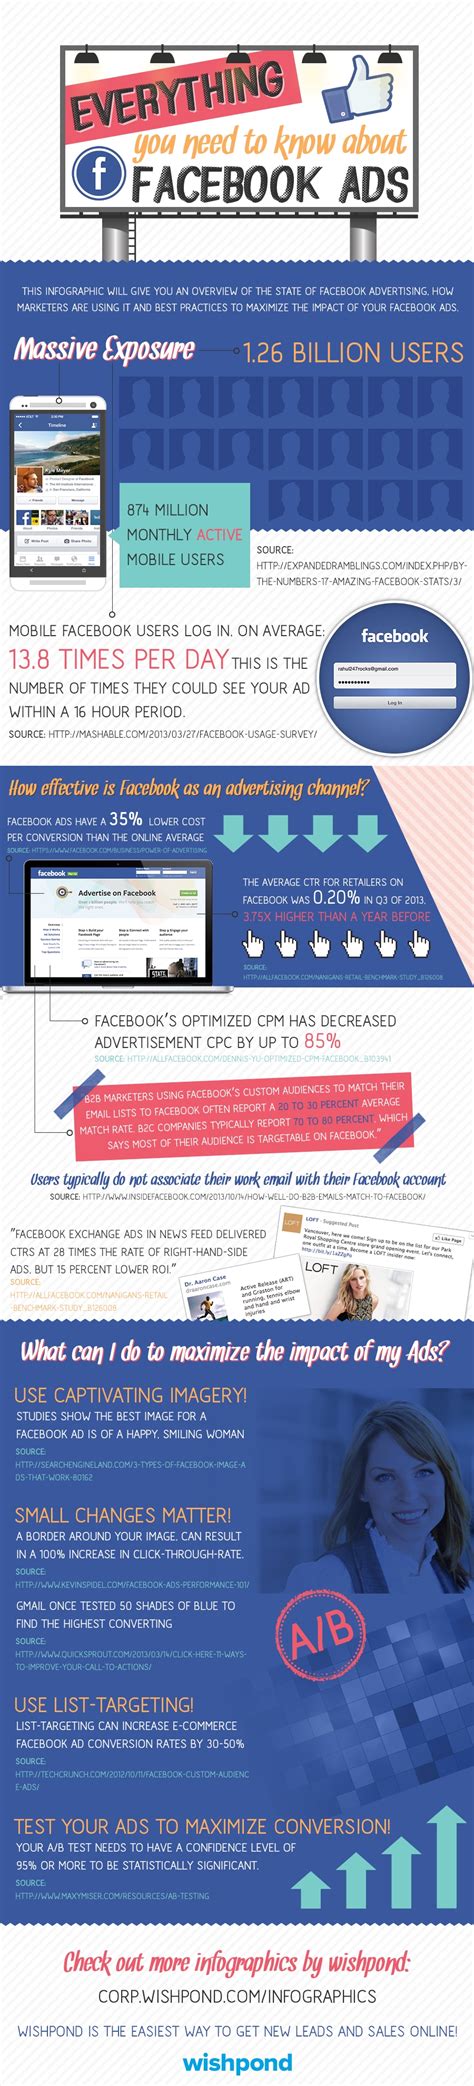 A Quick Facebook Advertising Overview Infographic